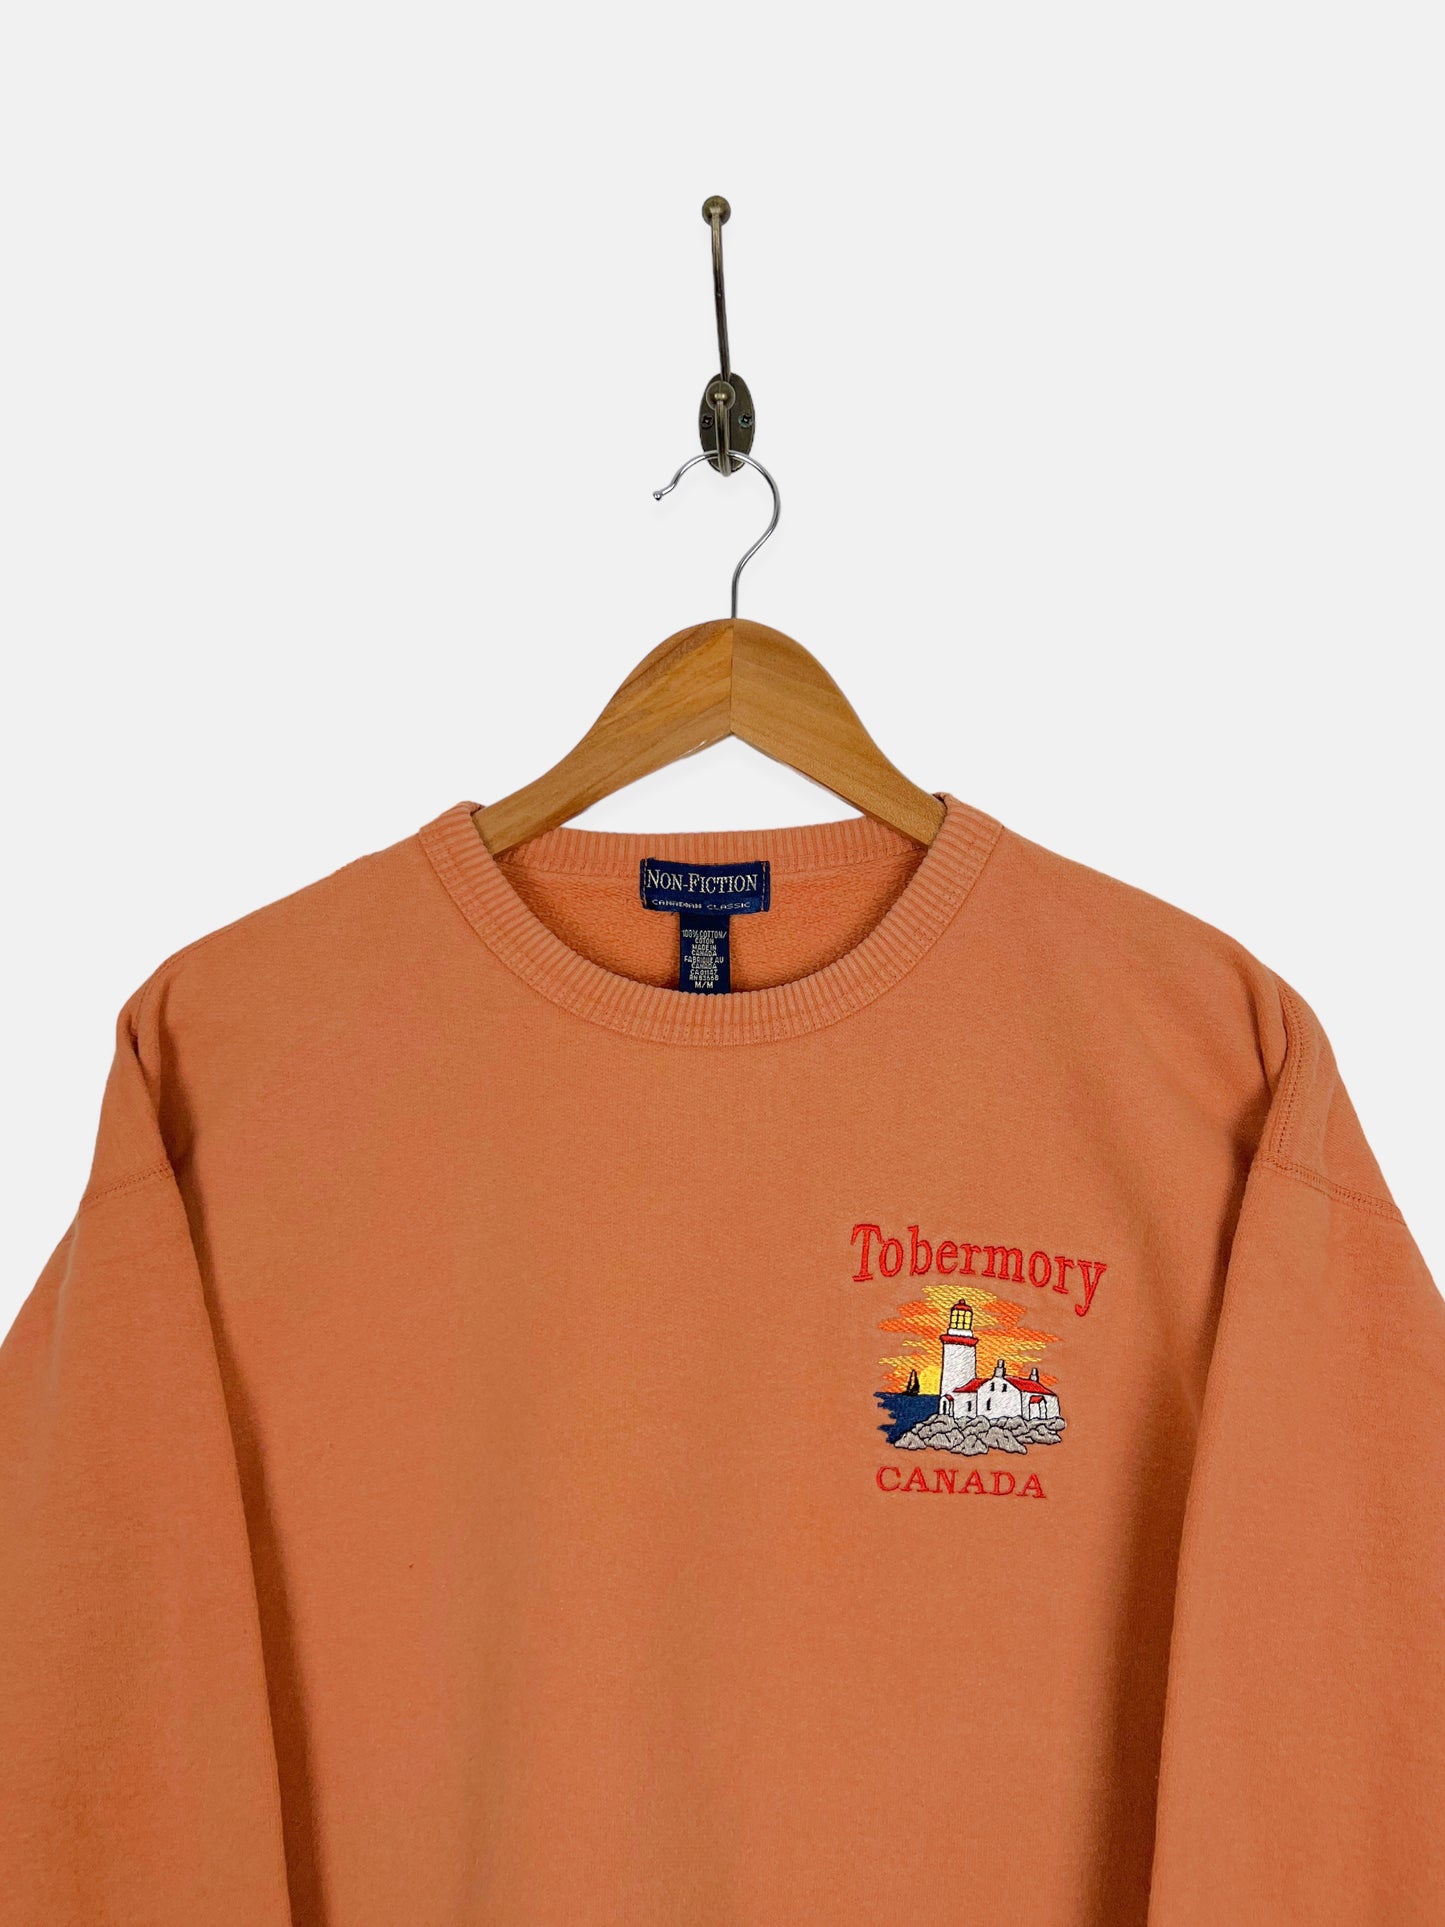 90's Tobermory Canada Made Embroidered Vintage Sweatshirt Size L-XL